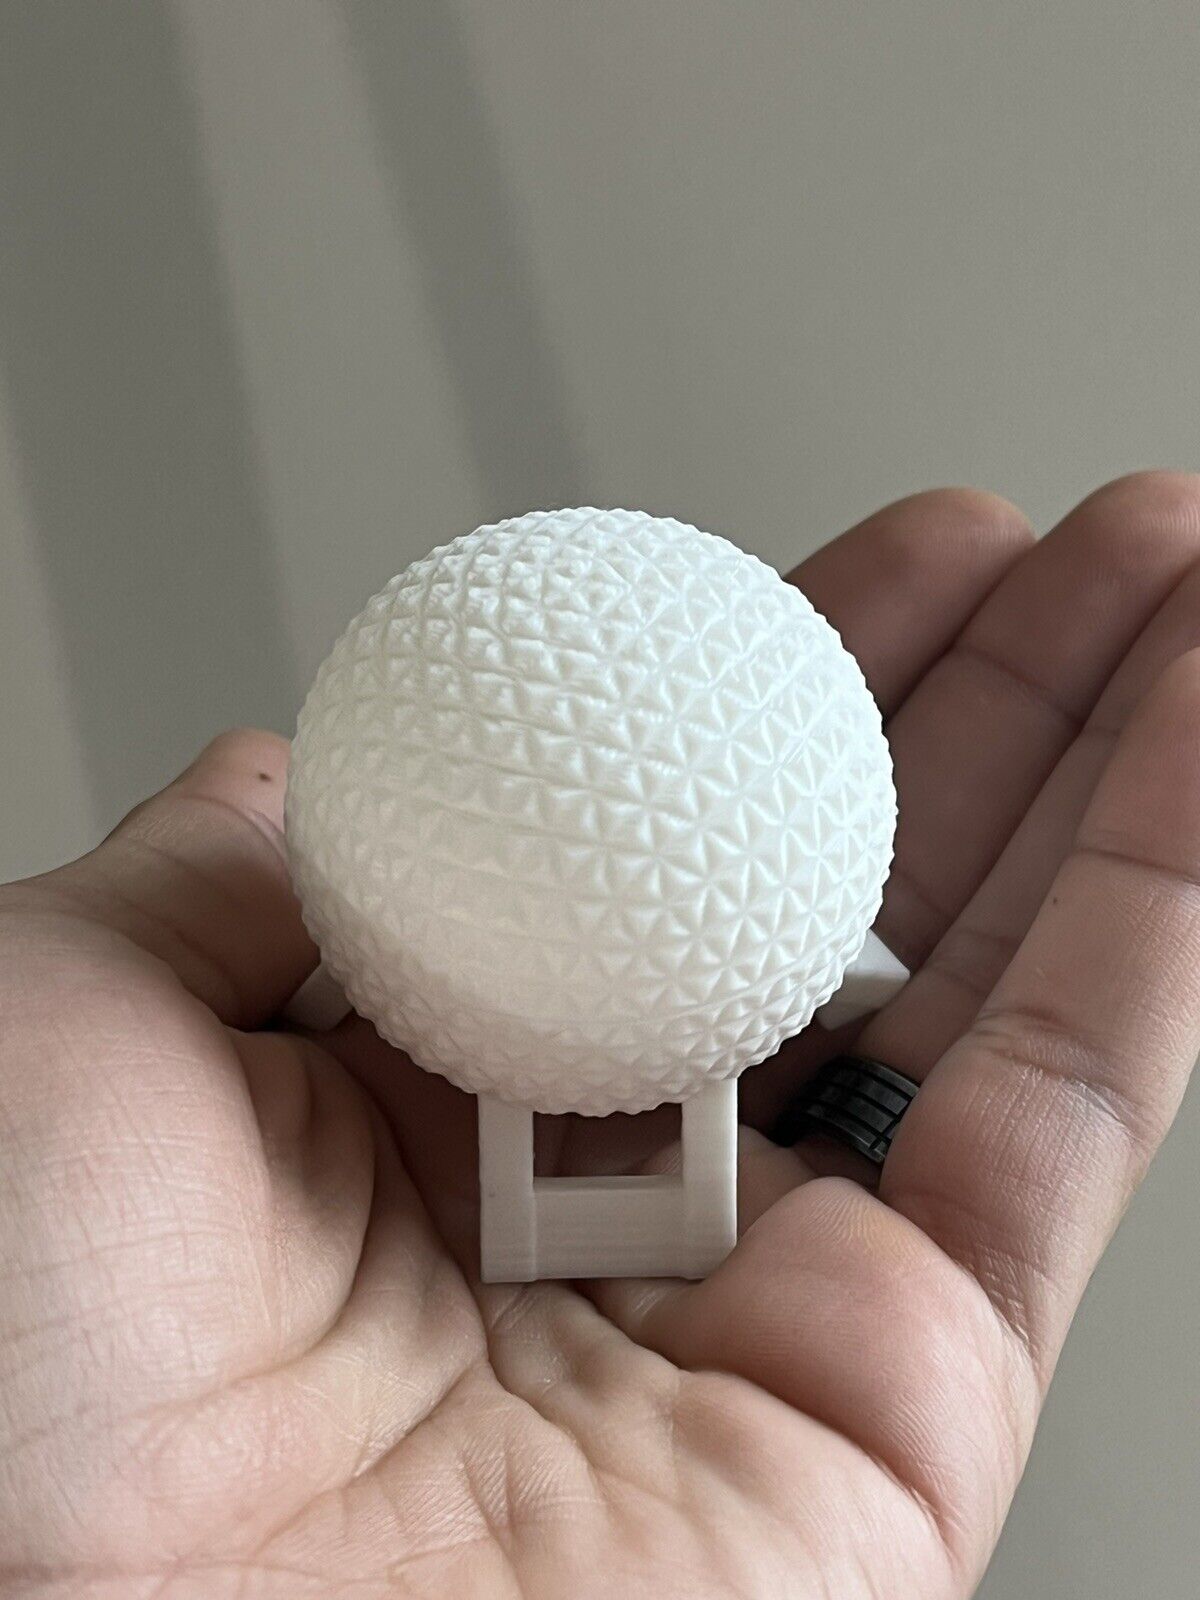 Spaceship Earth Desk Ornament for Disney Epcot 3D Printed